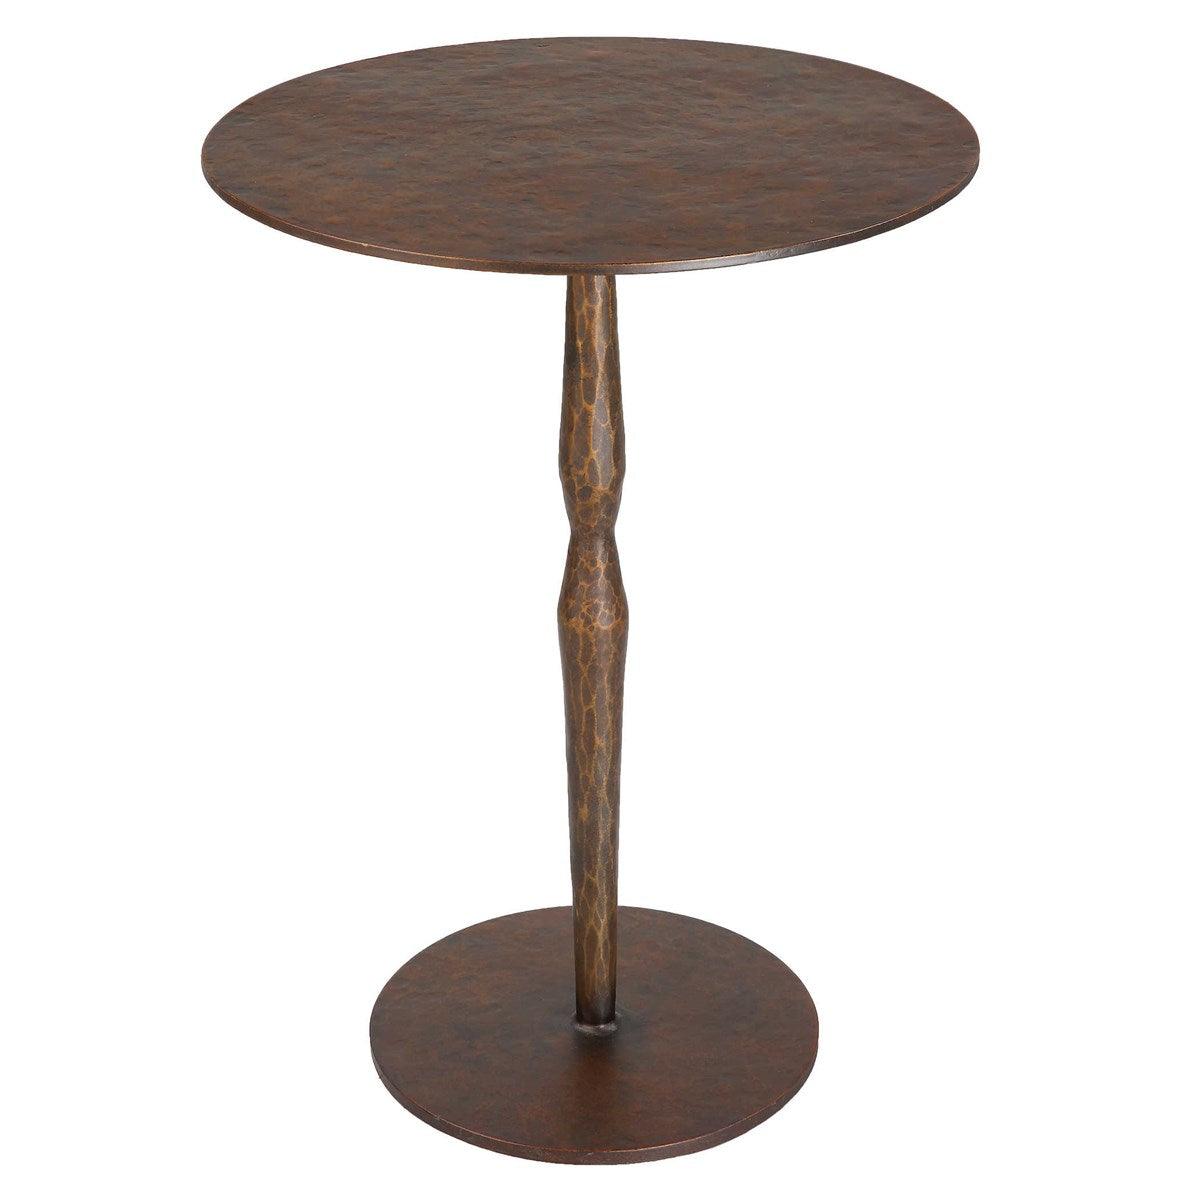 The Uttermost - Industria Accent Table - 22904 | Montreal Lighting & Hardware